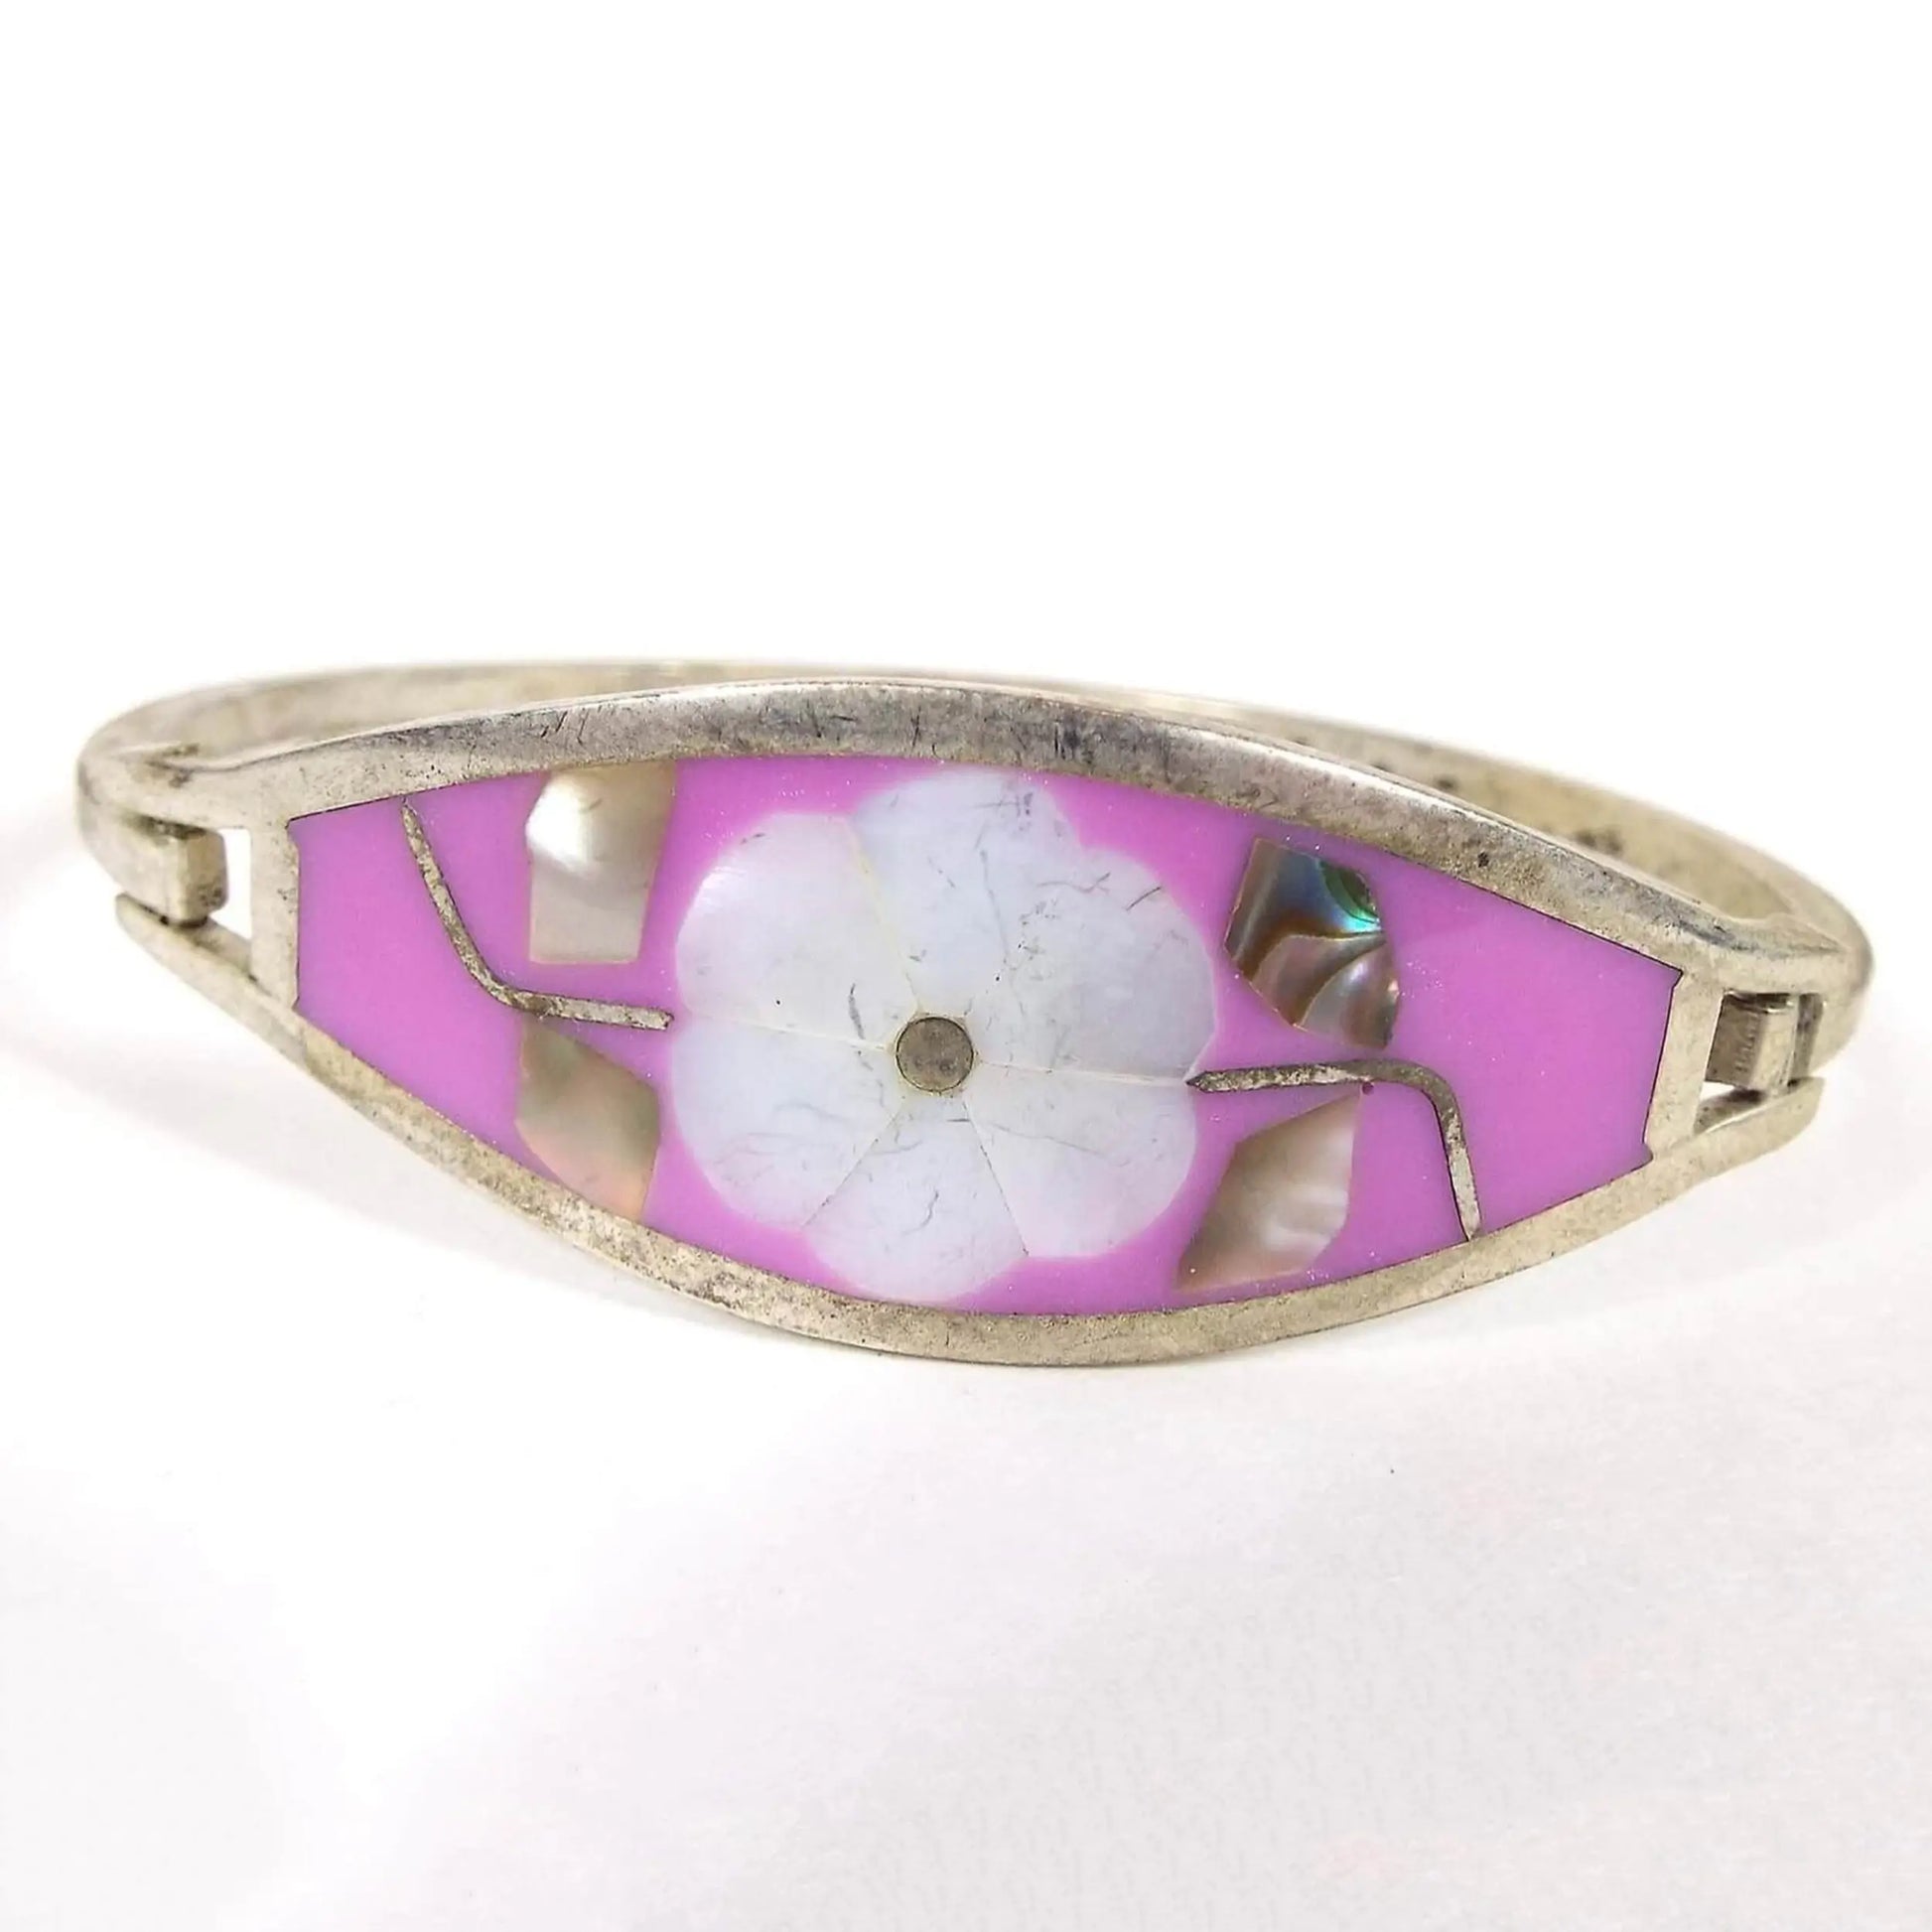 Front view of the retro vintage hinged bangle bracelet. The alpaca metal is silver tone in color. The front has a large tapered curved area with bright pink enamel and a flower design in the middle. Flower petals are pearly white inlaid mother of pearl shell and the leaves on each side of the flower are multi color pearly inlaid abalone shell. There is a thin curved band of metal forming the back of the bangle that's hinged on one side and has a hook clasp on the other to open and close the bracelet.